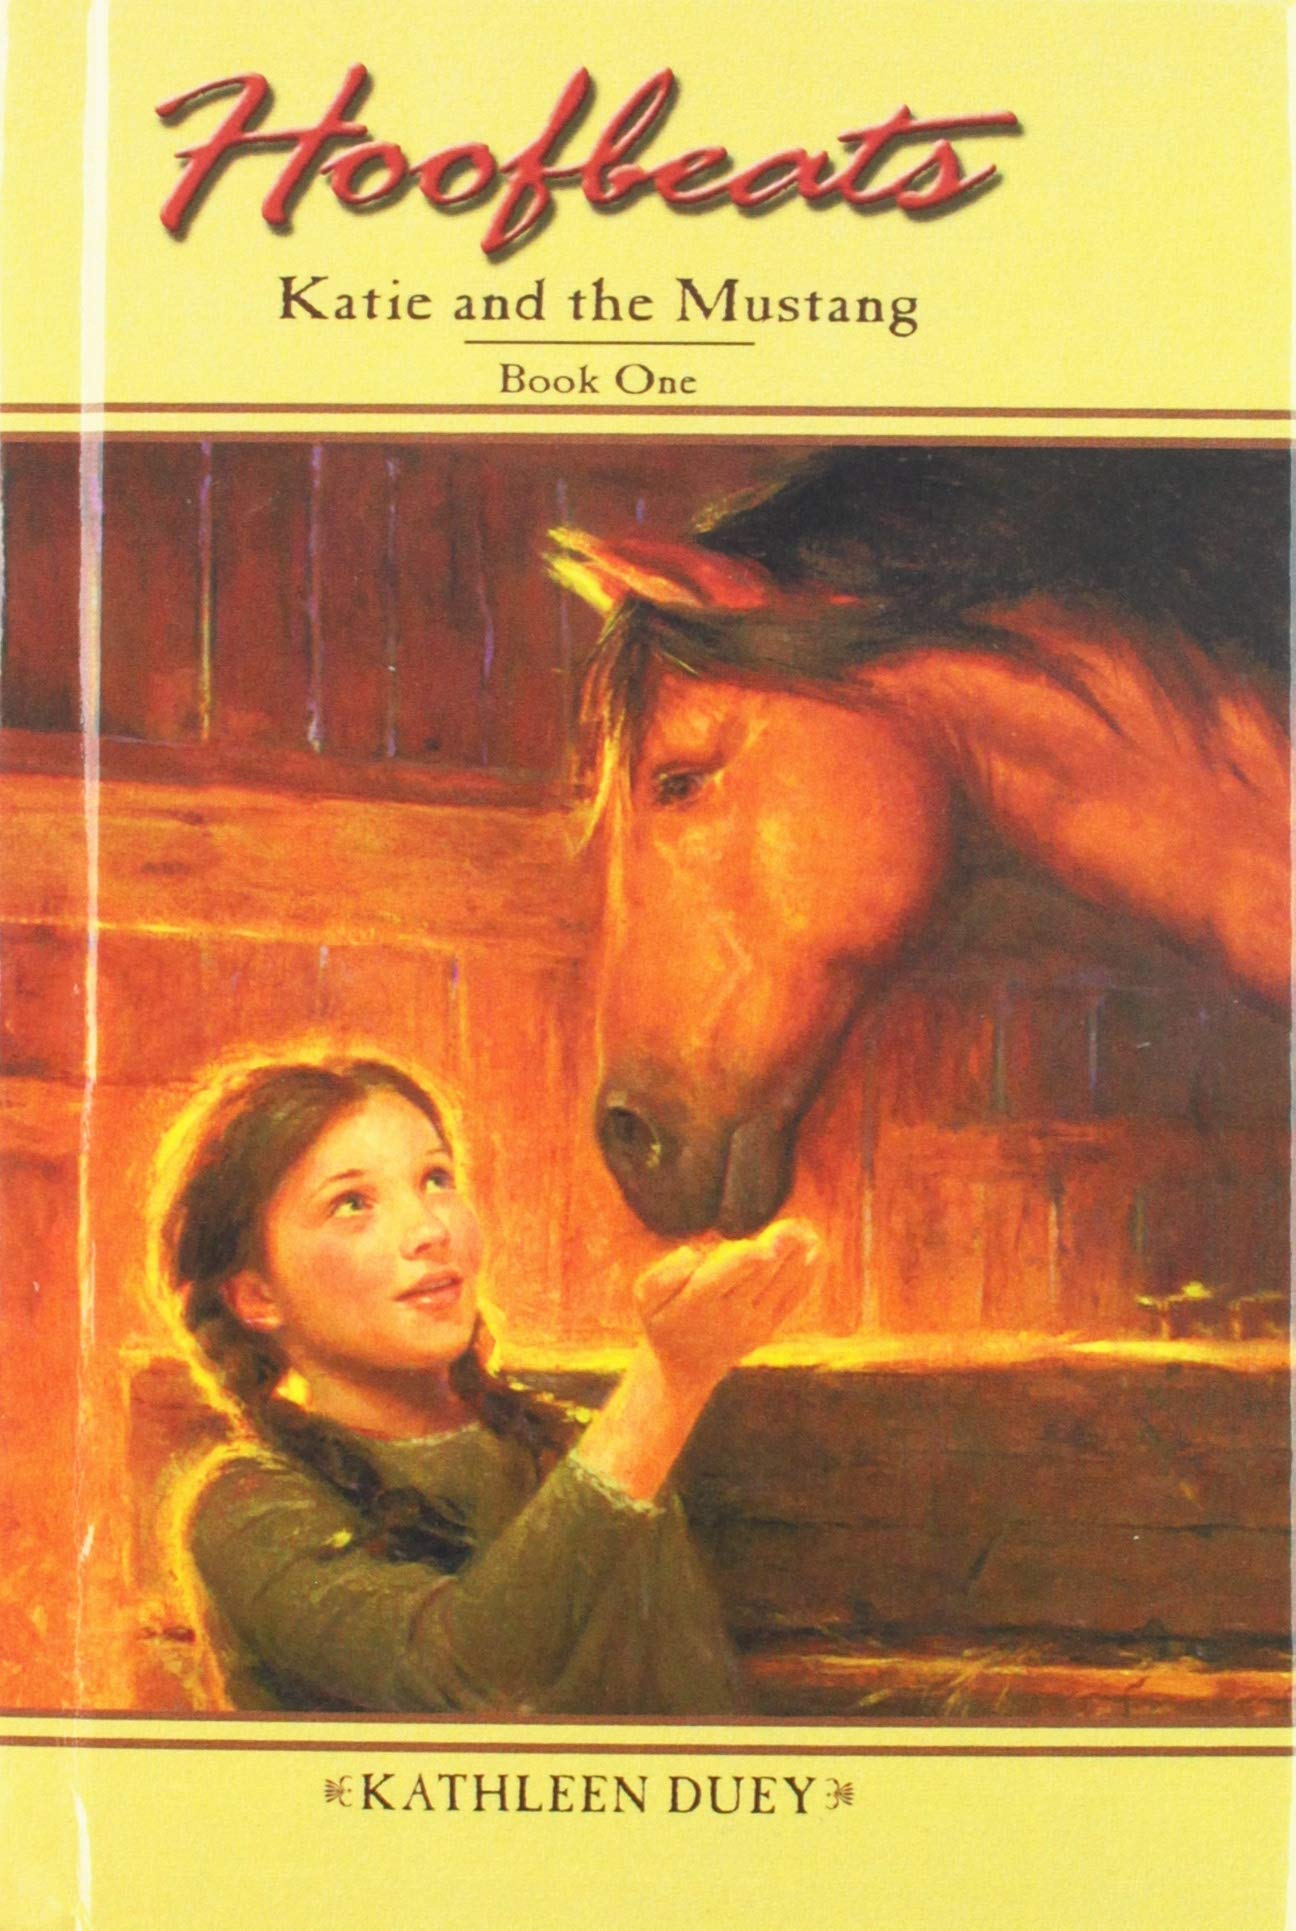 Katie and the Mustang: Book One